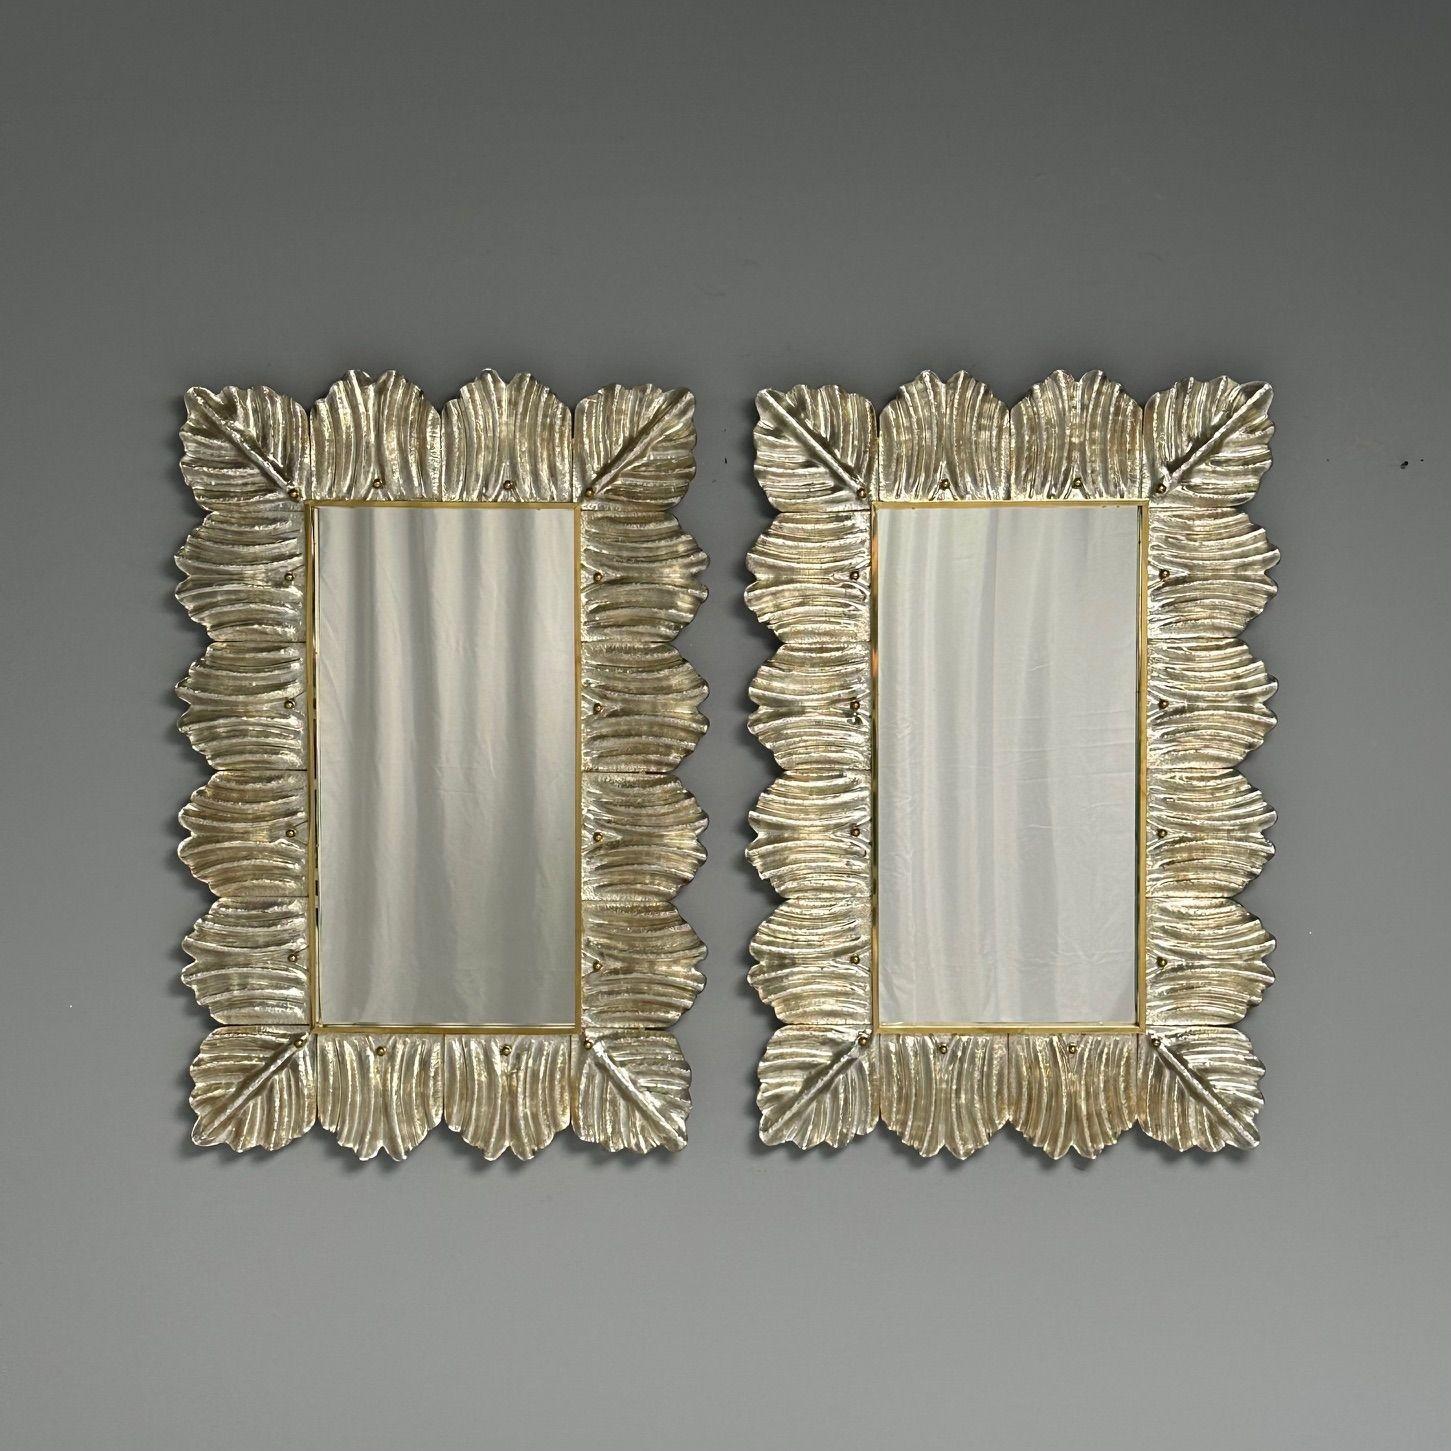 Italian Contemporary, Wall Mirrors, Leaf Motif, Murano Glass, Silver Gilt, Italy, 2023 For Sale